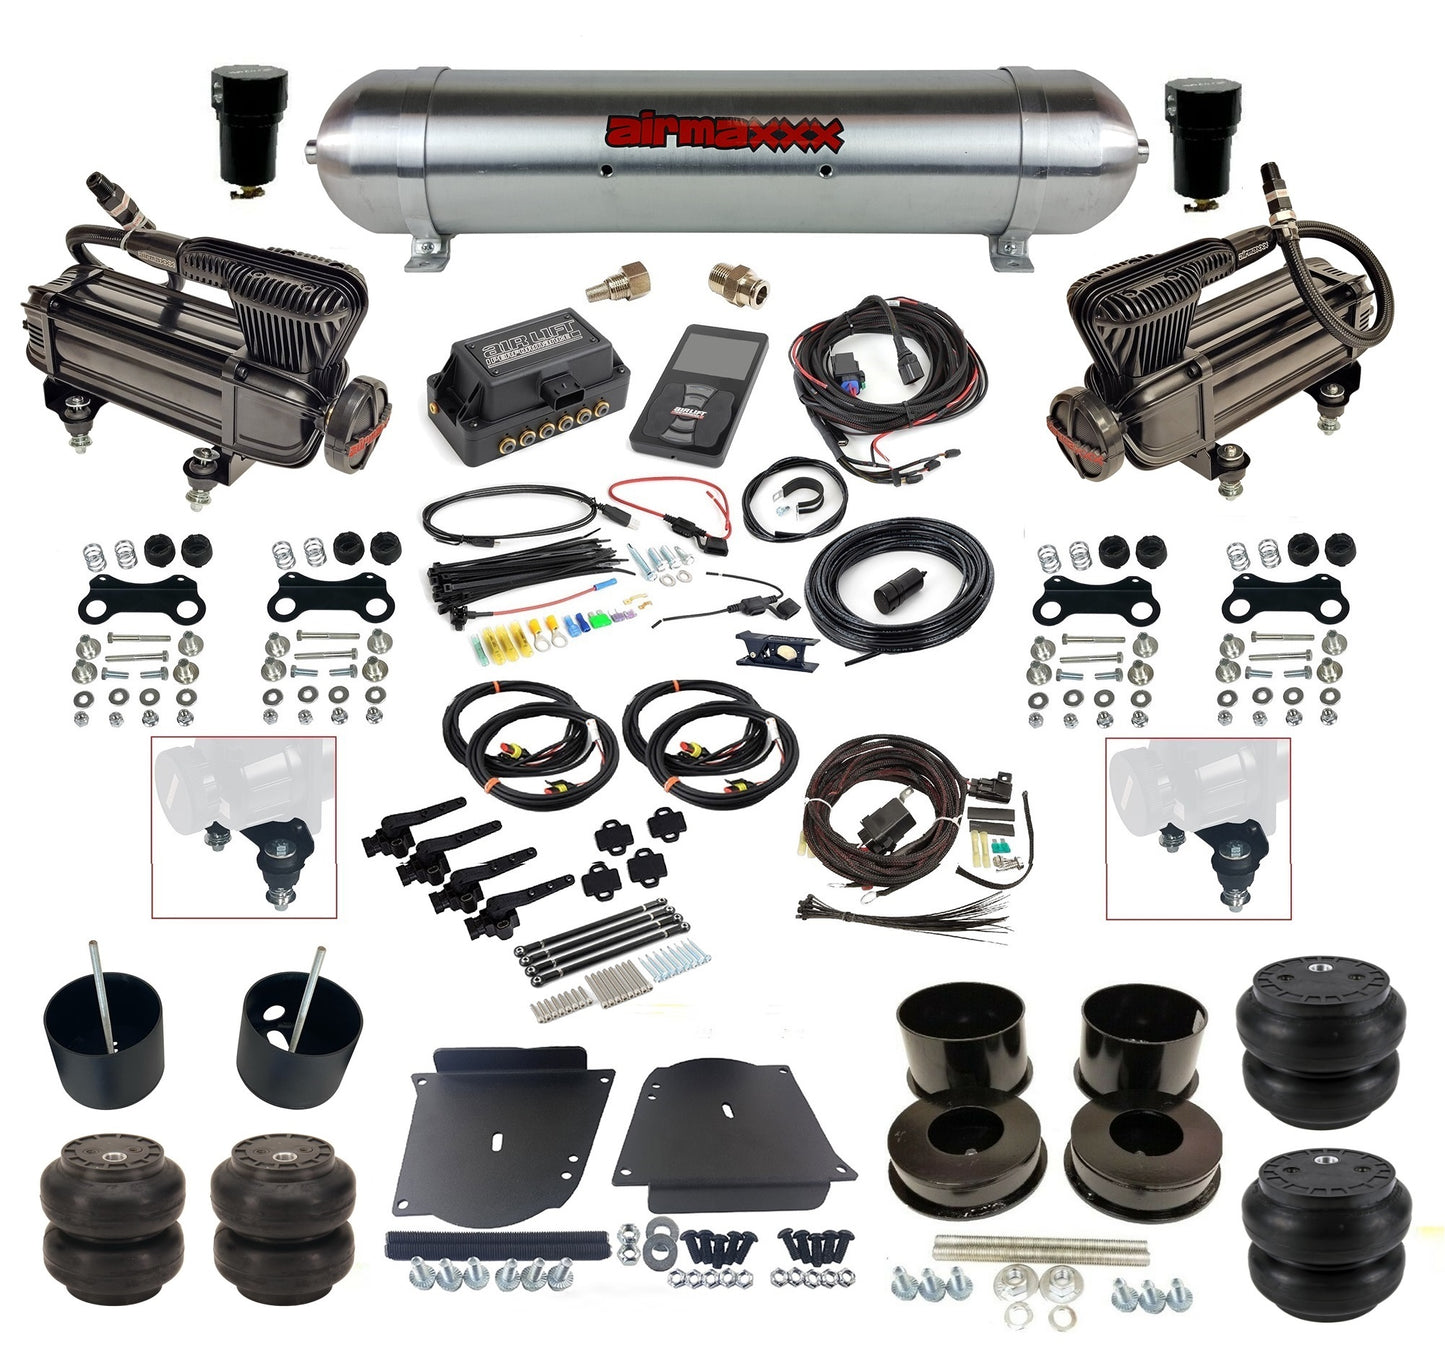 580 Chrome w/3H 27695 Air Lift 3/8" Height Presets Air Suspension Kit Fits 1964-72 GM A-Body